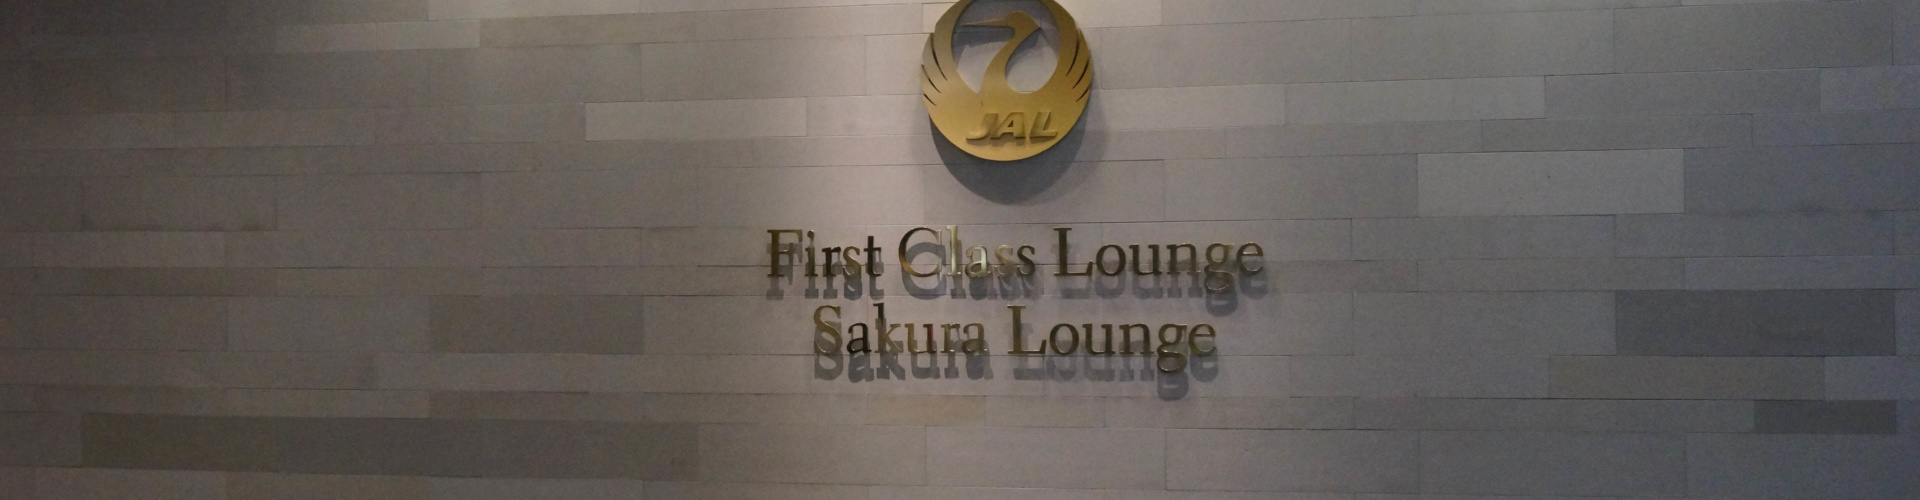 Review: Japan Airlines First Class Lounge Tokyo – Narita